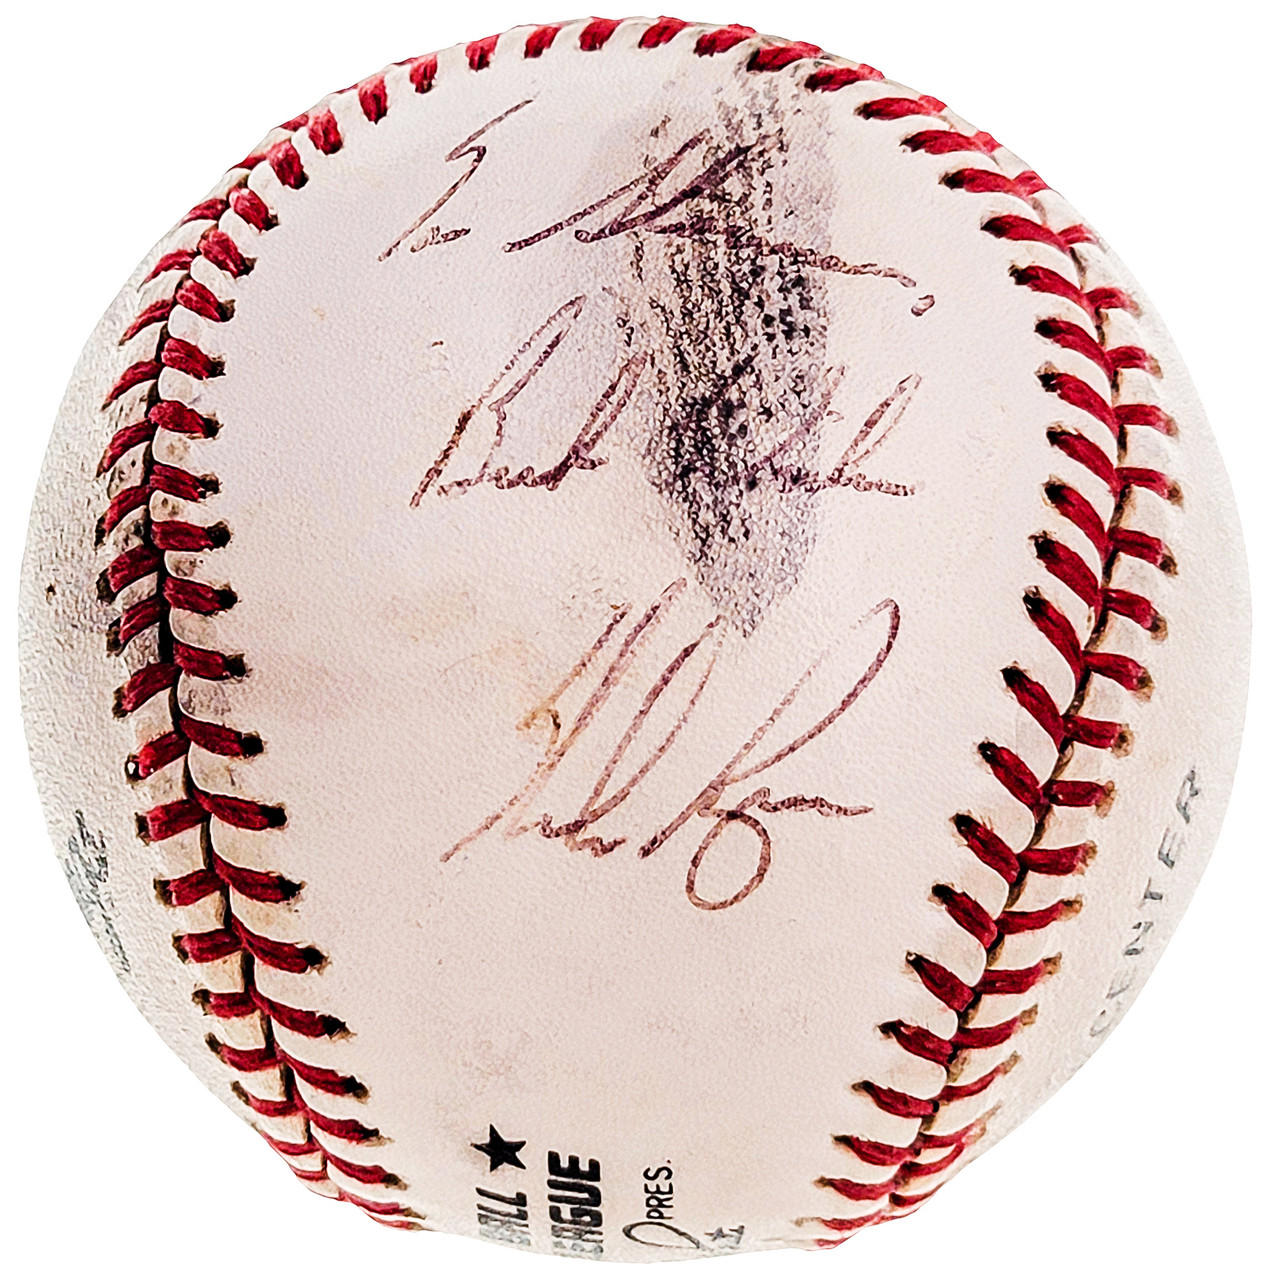 Nolan Ryan Autographed Official NL Baseball New York Mets, Houston Astros  To Steven, Best Wishes JSA #DD97517